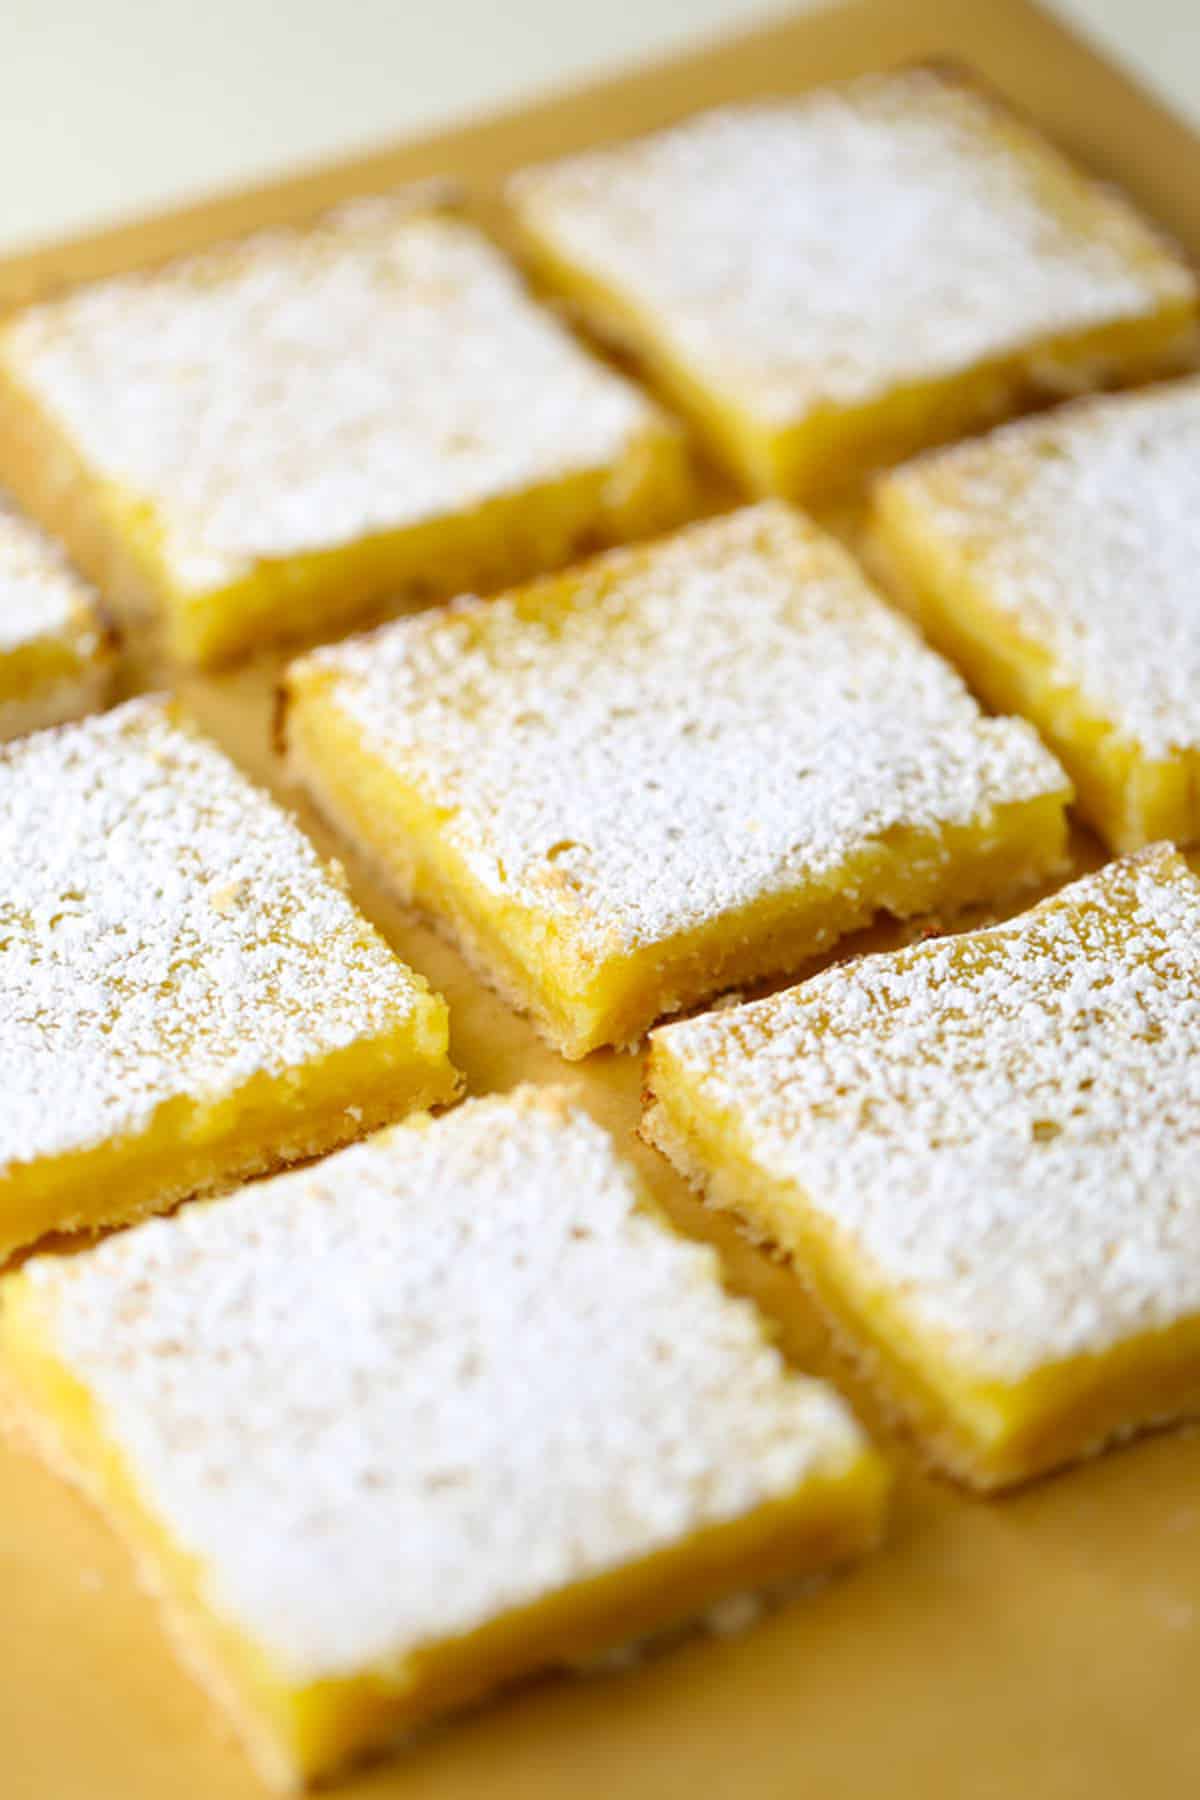 Eight lemon bars on parchment paper with powdered sugar.